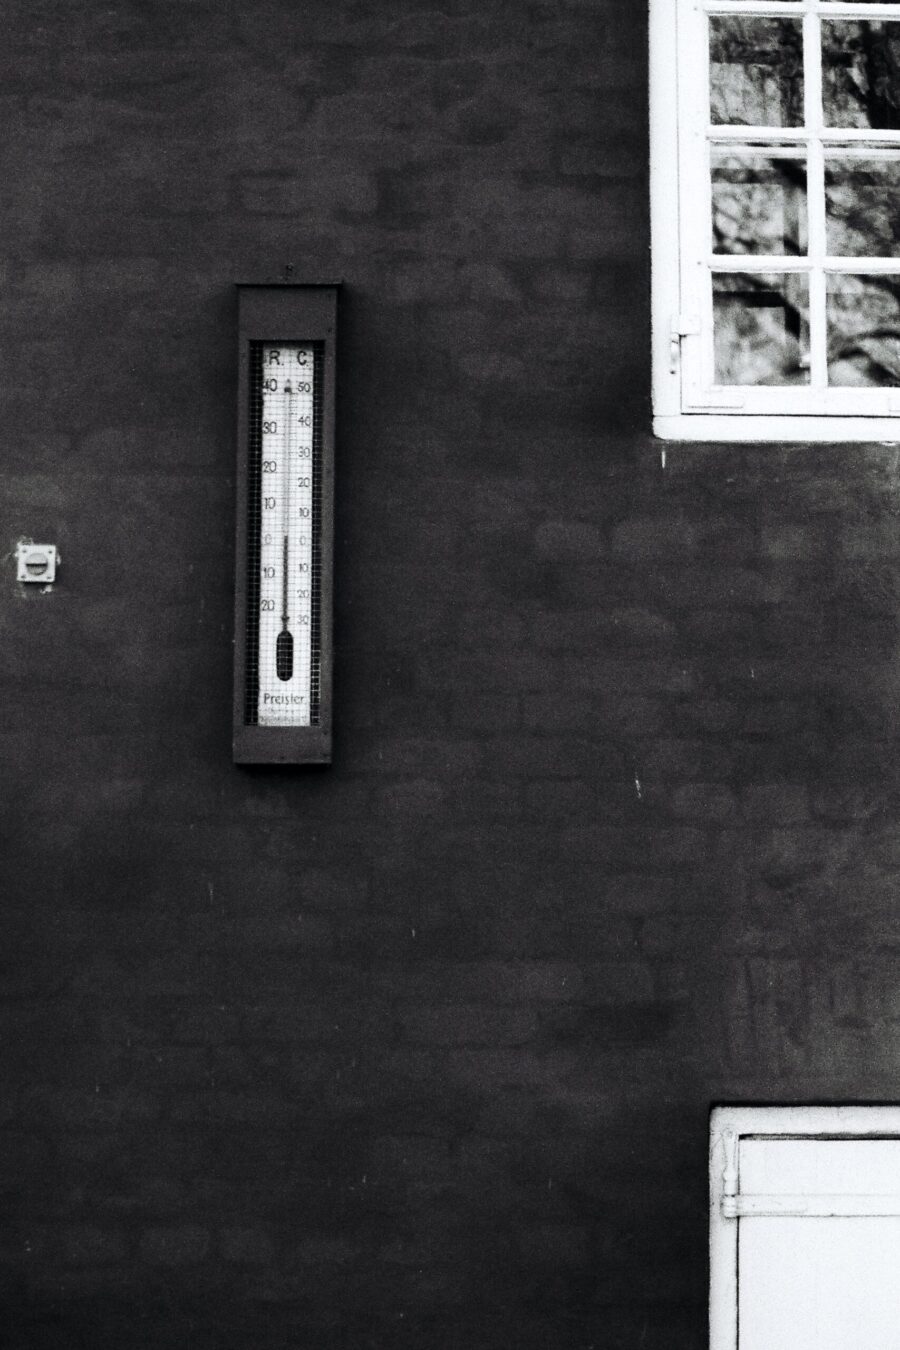 An outdoor thermometer attached to a house